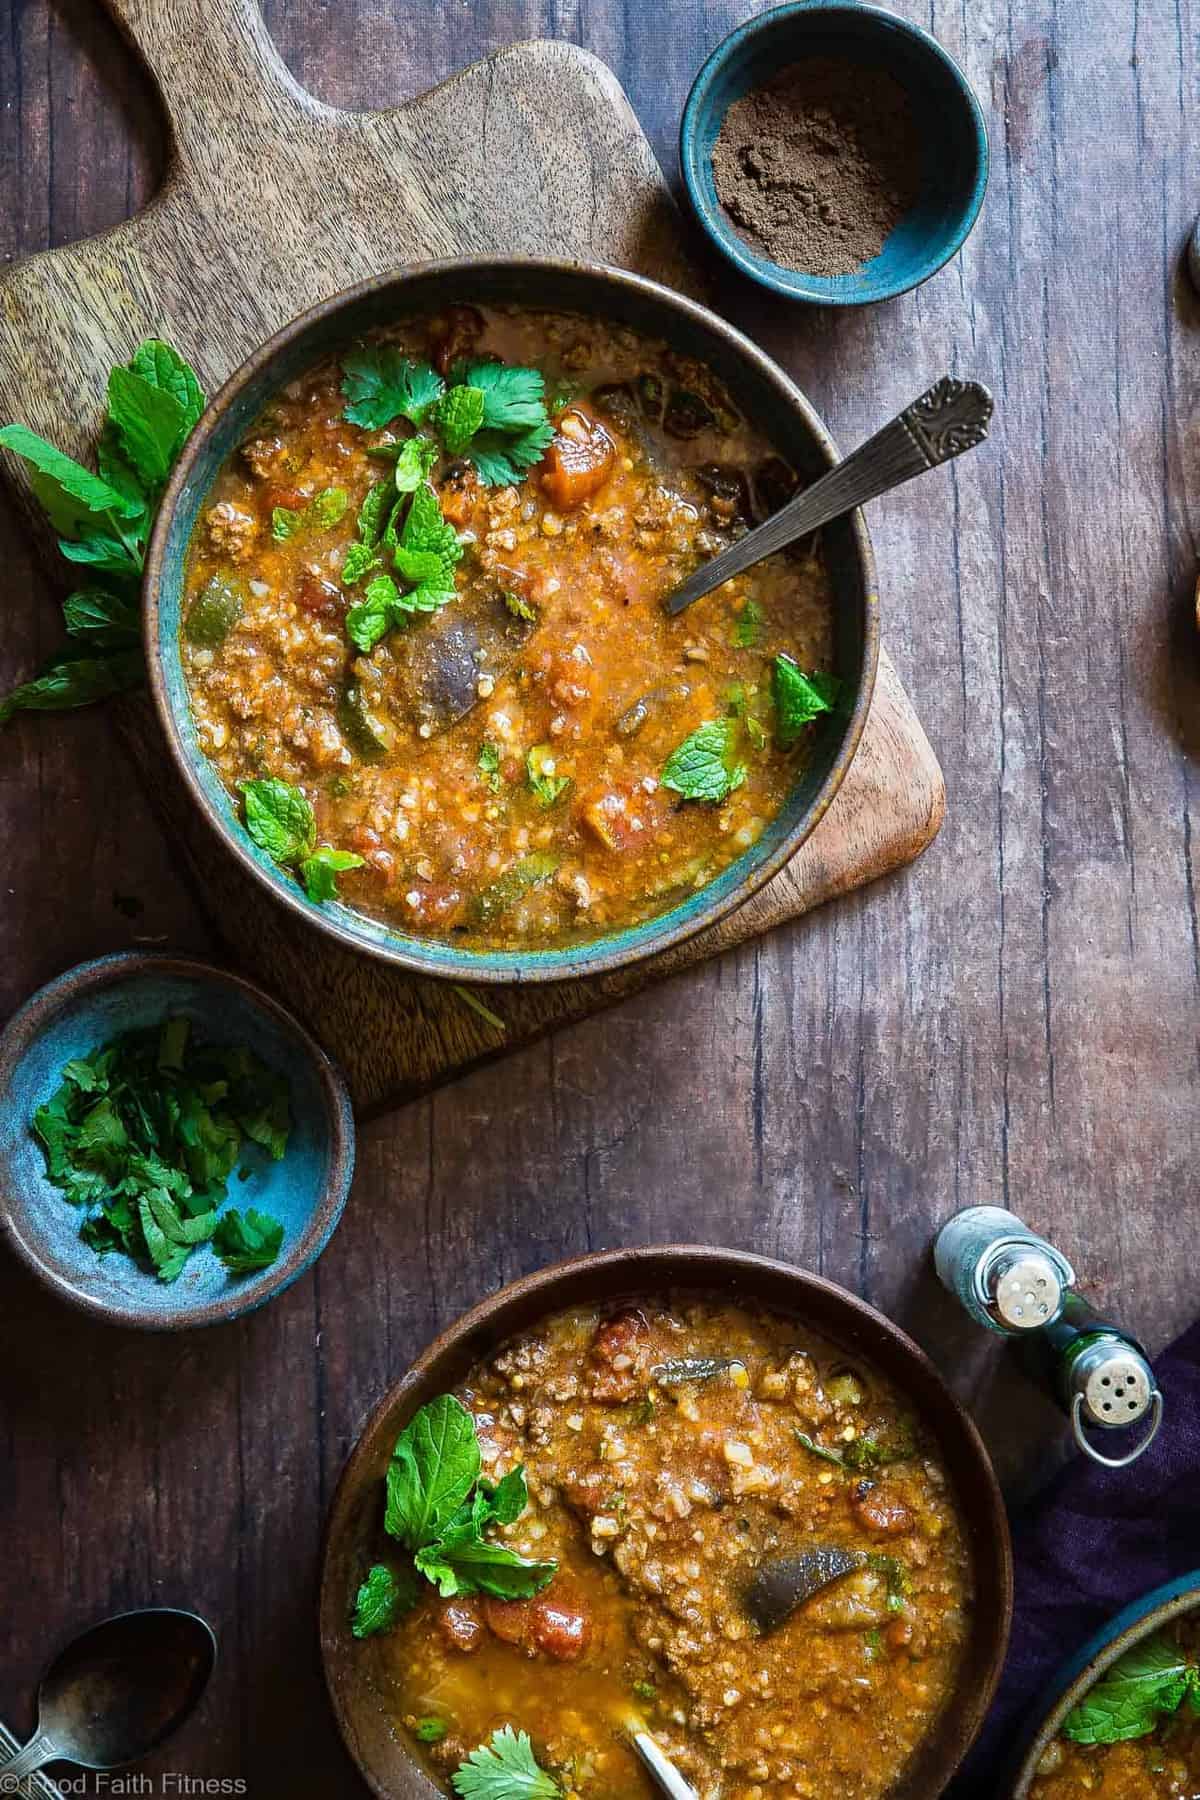 Moroccan Instant Pot Hearty Vegetable Beef Soup - A quick and easy, COZY, 30 minute dinner with a taste of the Middle East! Gluten free, low carb, paleo/whole30 compliant and so filling for only 220 calories!| #Foodfaithfitness | #Glutenfree #Paleo #Whole30 #Lowcarb #Instantpot